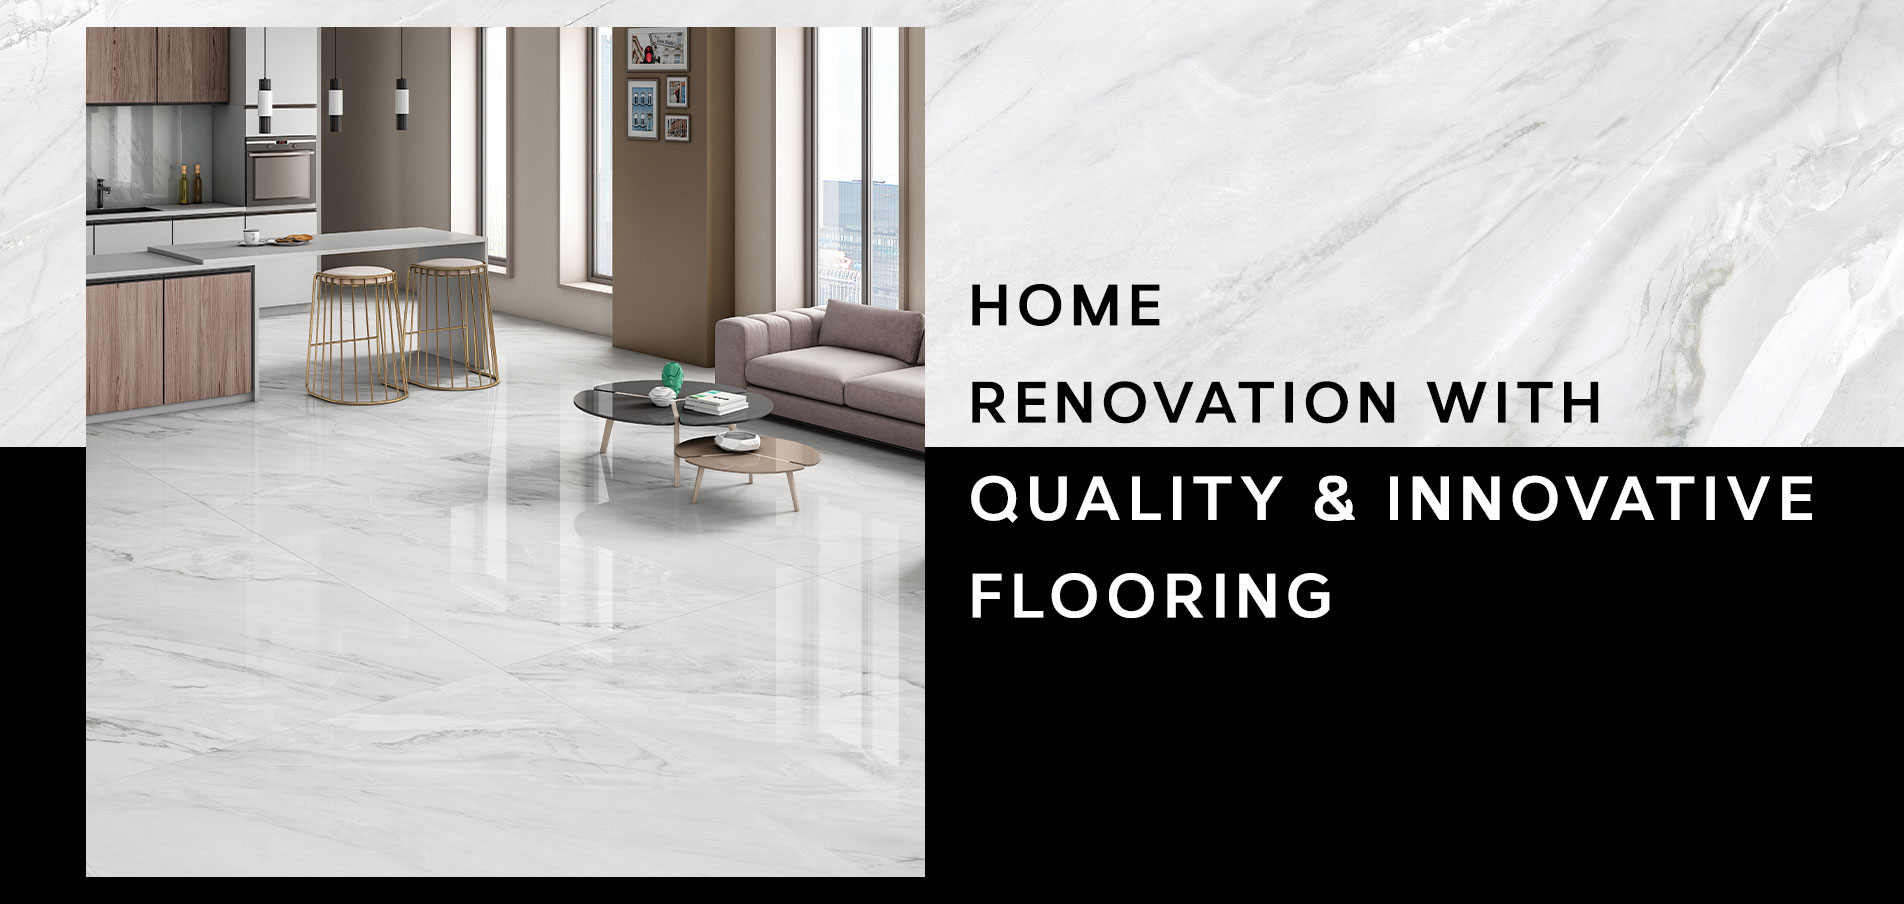 Home Renovation with Quality & Innovative Flooring by Simpolo